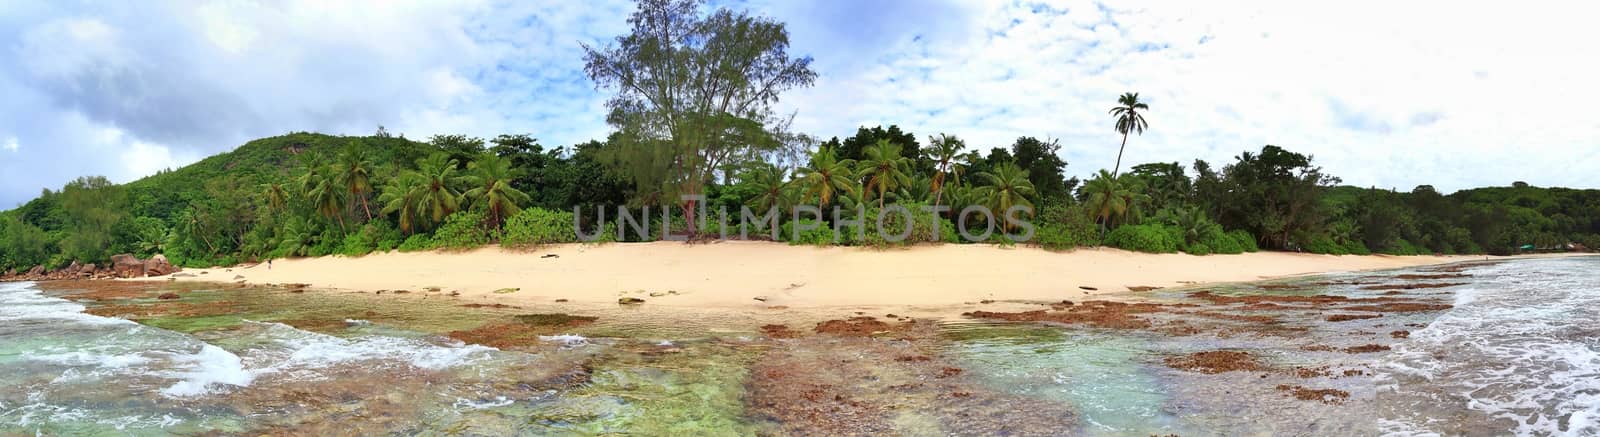 Stunning high resolution beach panorama taken on the paradise is by MP_foto71